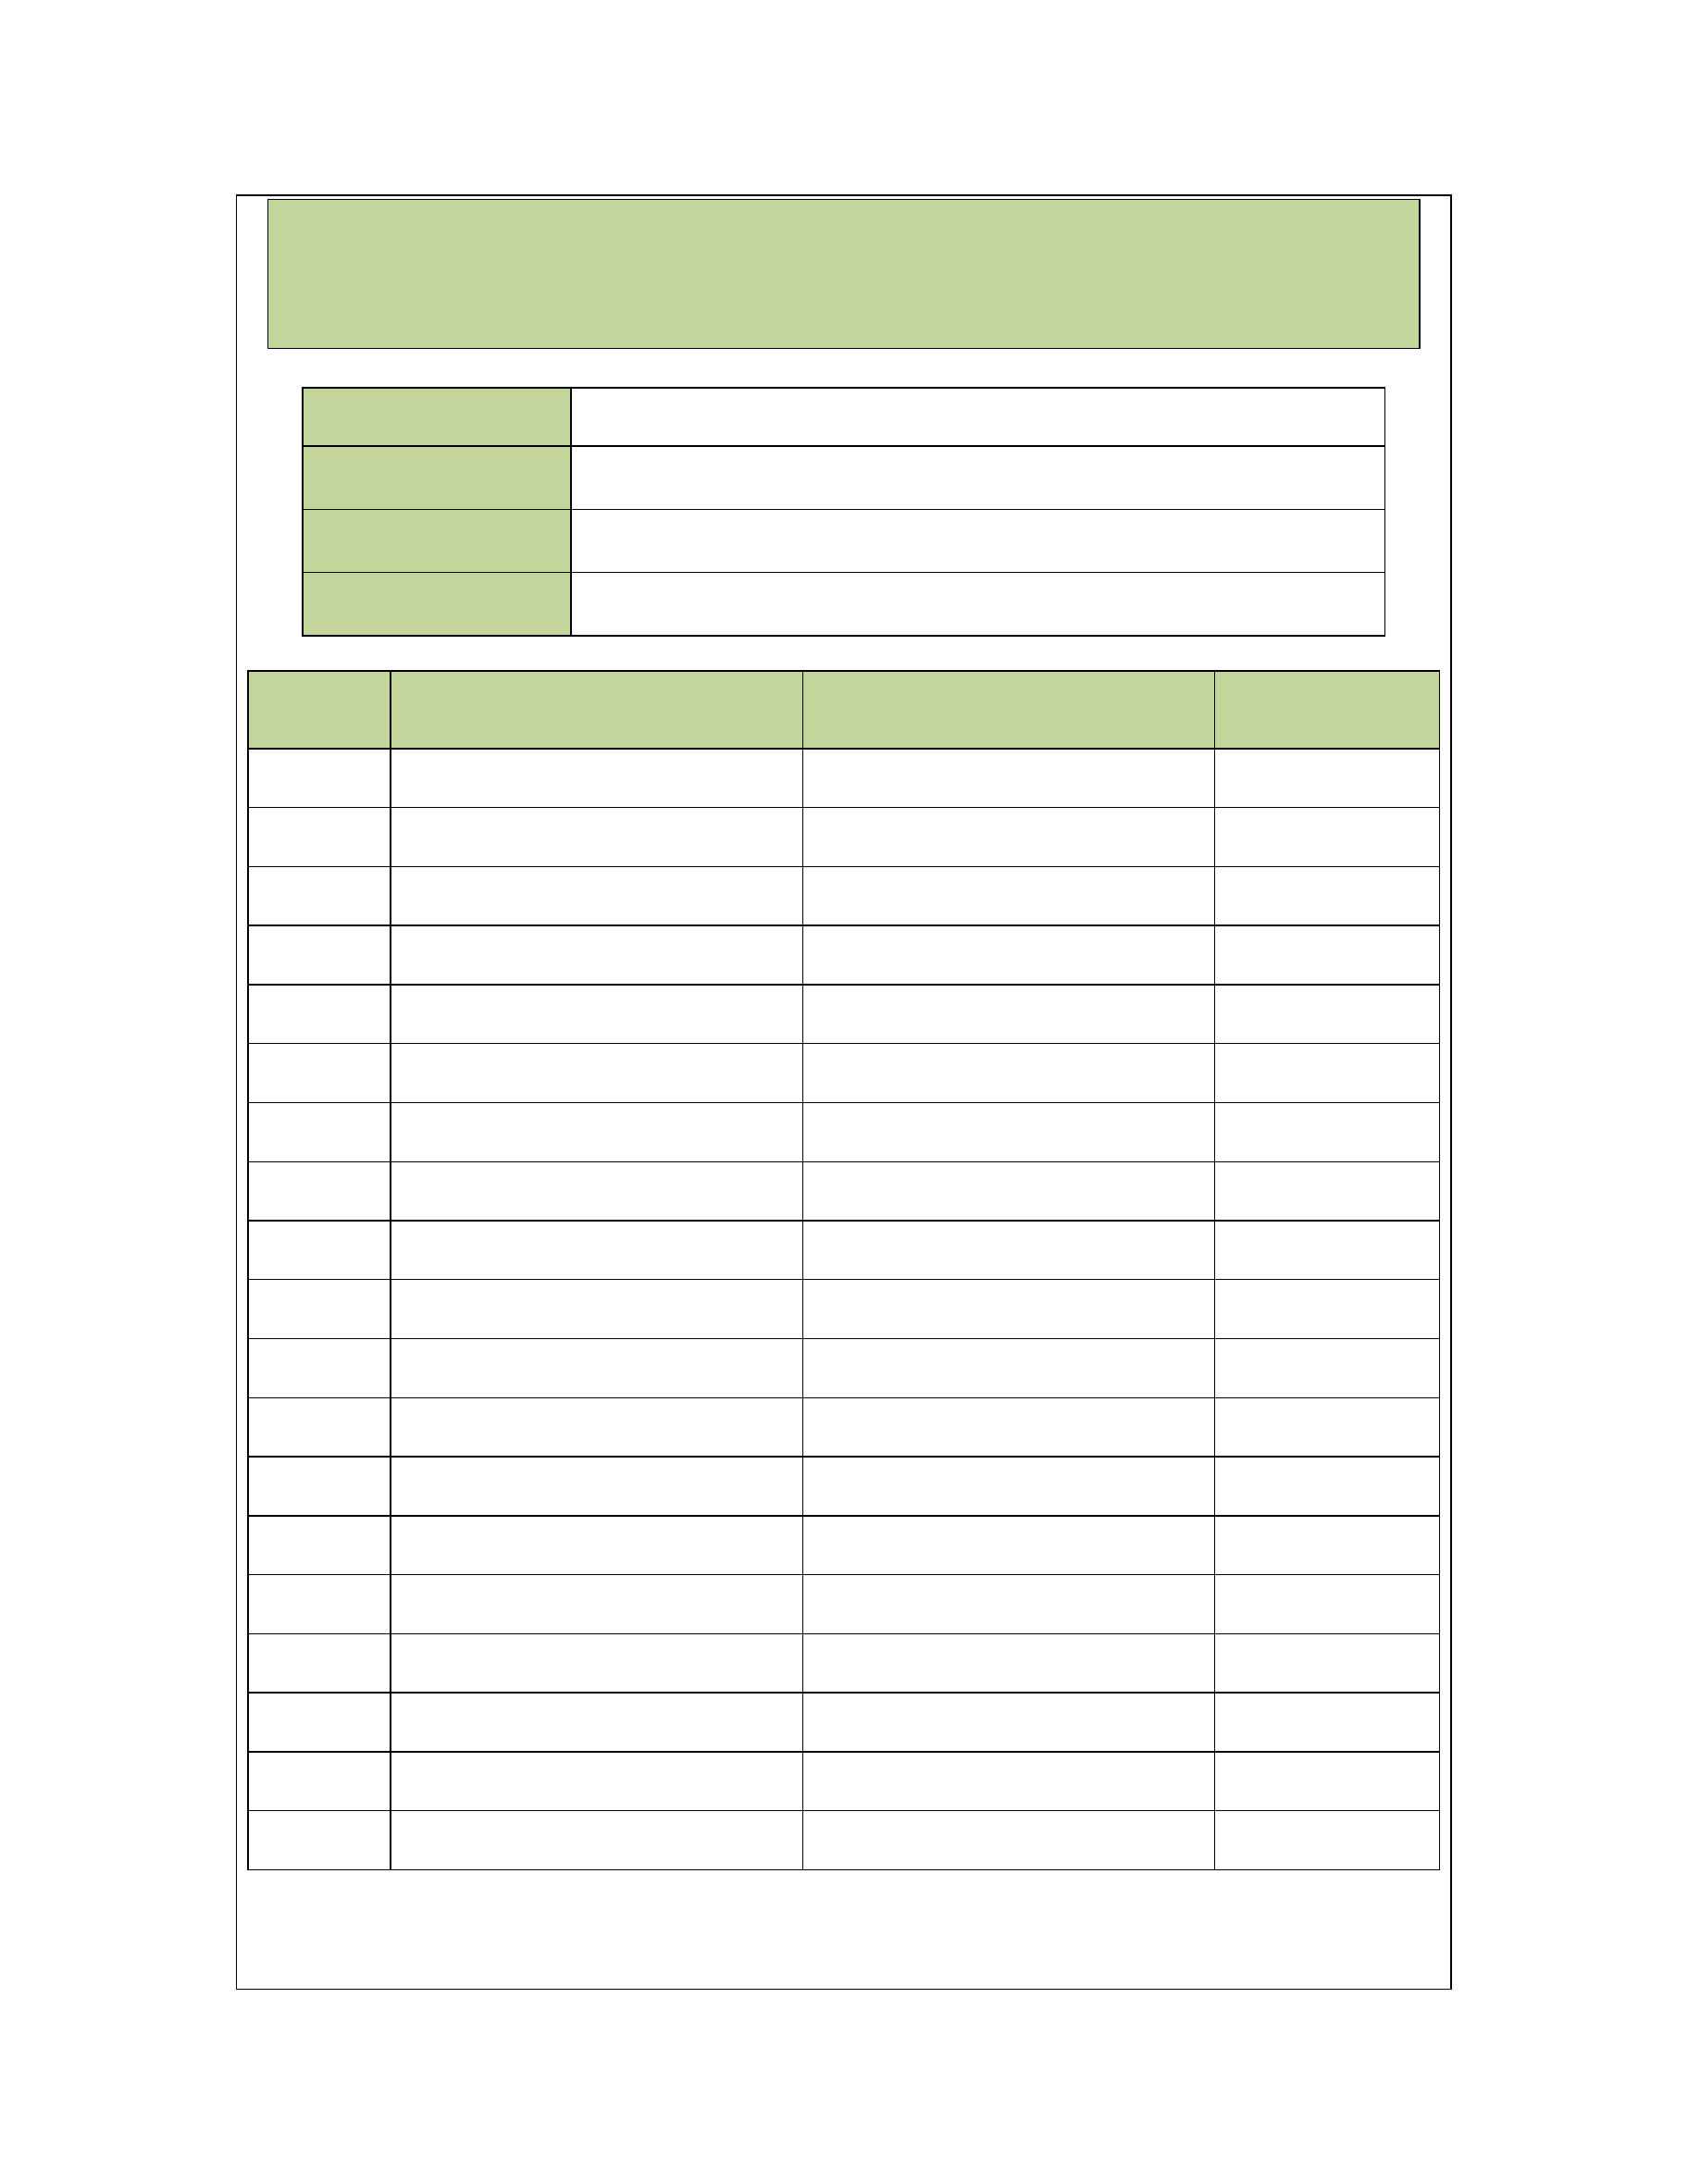 Printable Rent Ledger Customize and Print